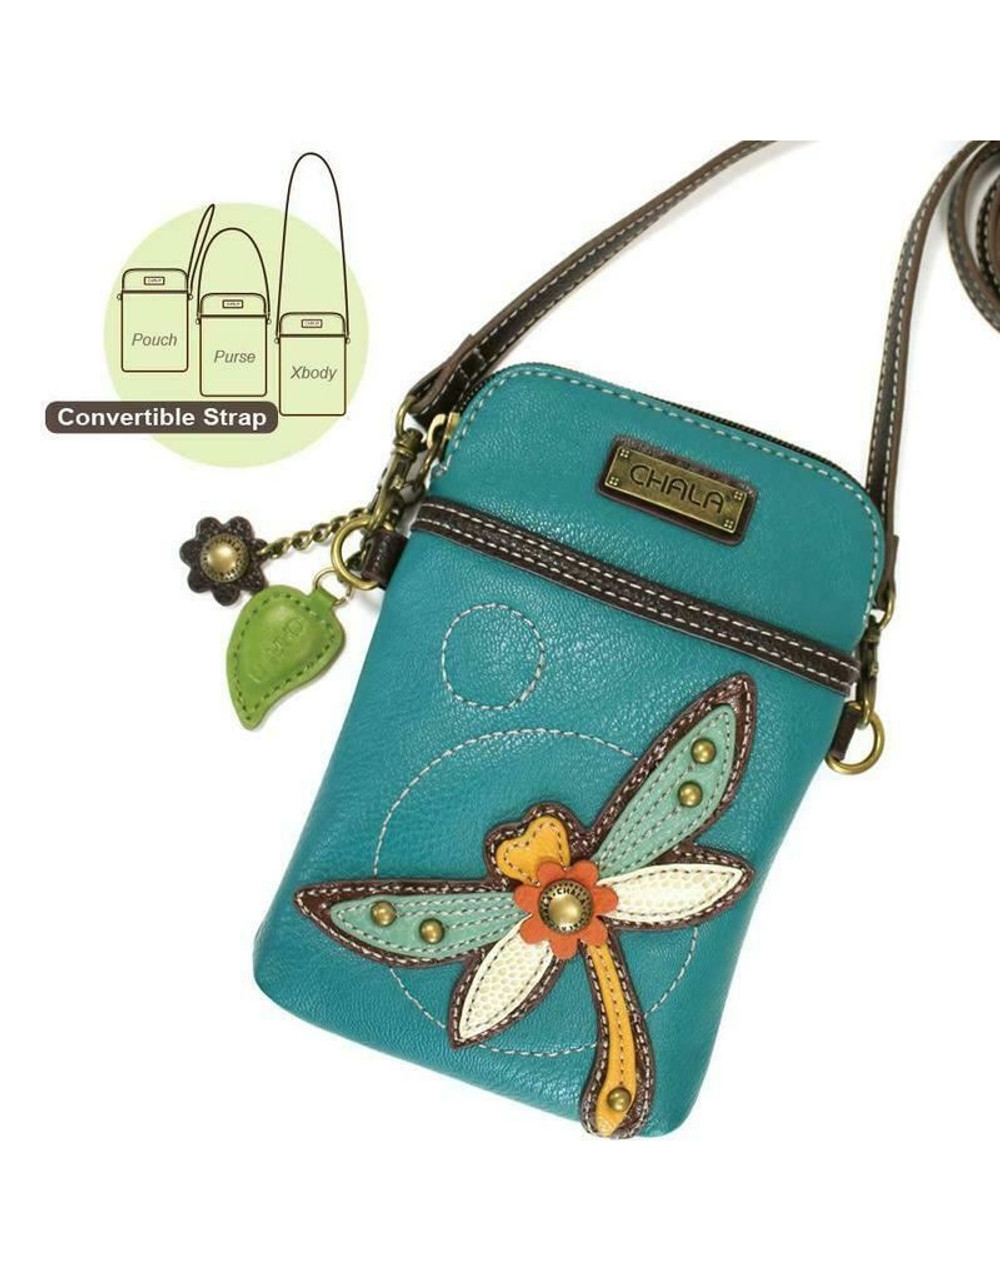 New Chala Cell Phone Purse Crossbody Pleather Converts DRAGONFLY Turquoise  Blue - MATZ Market